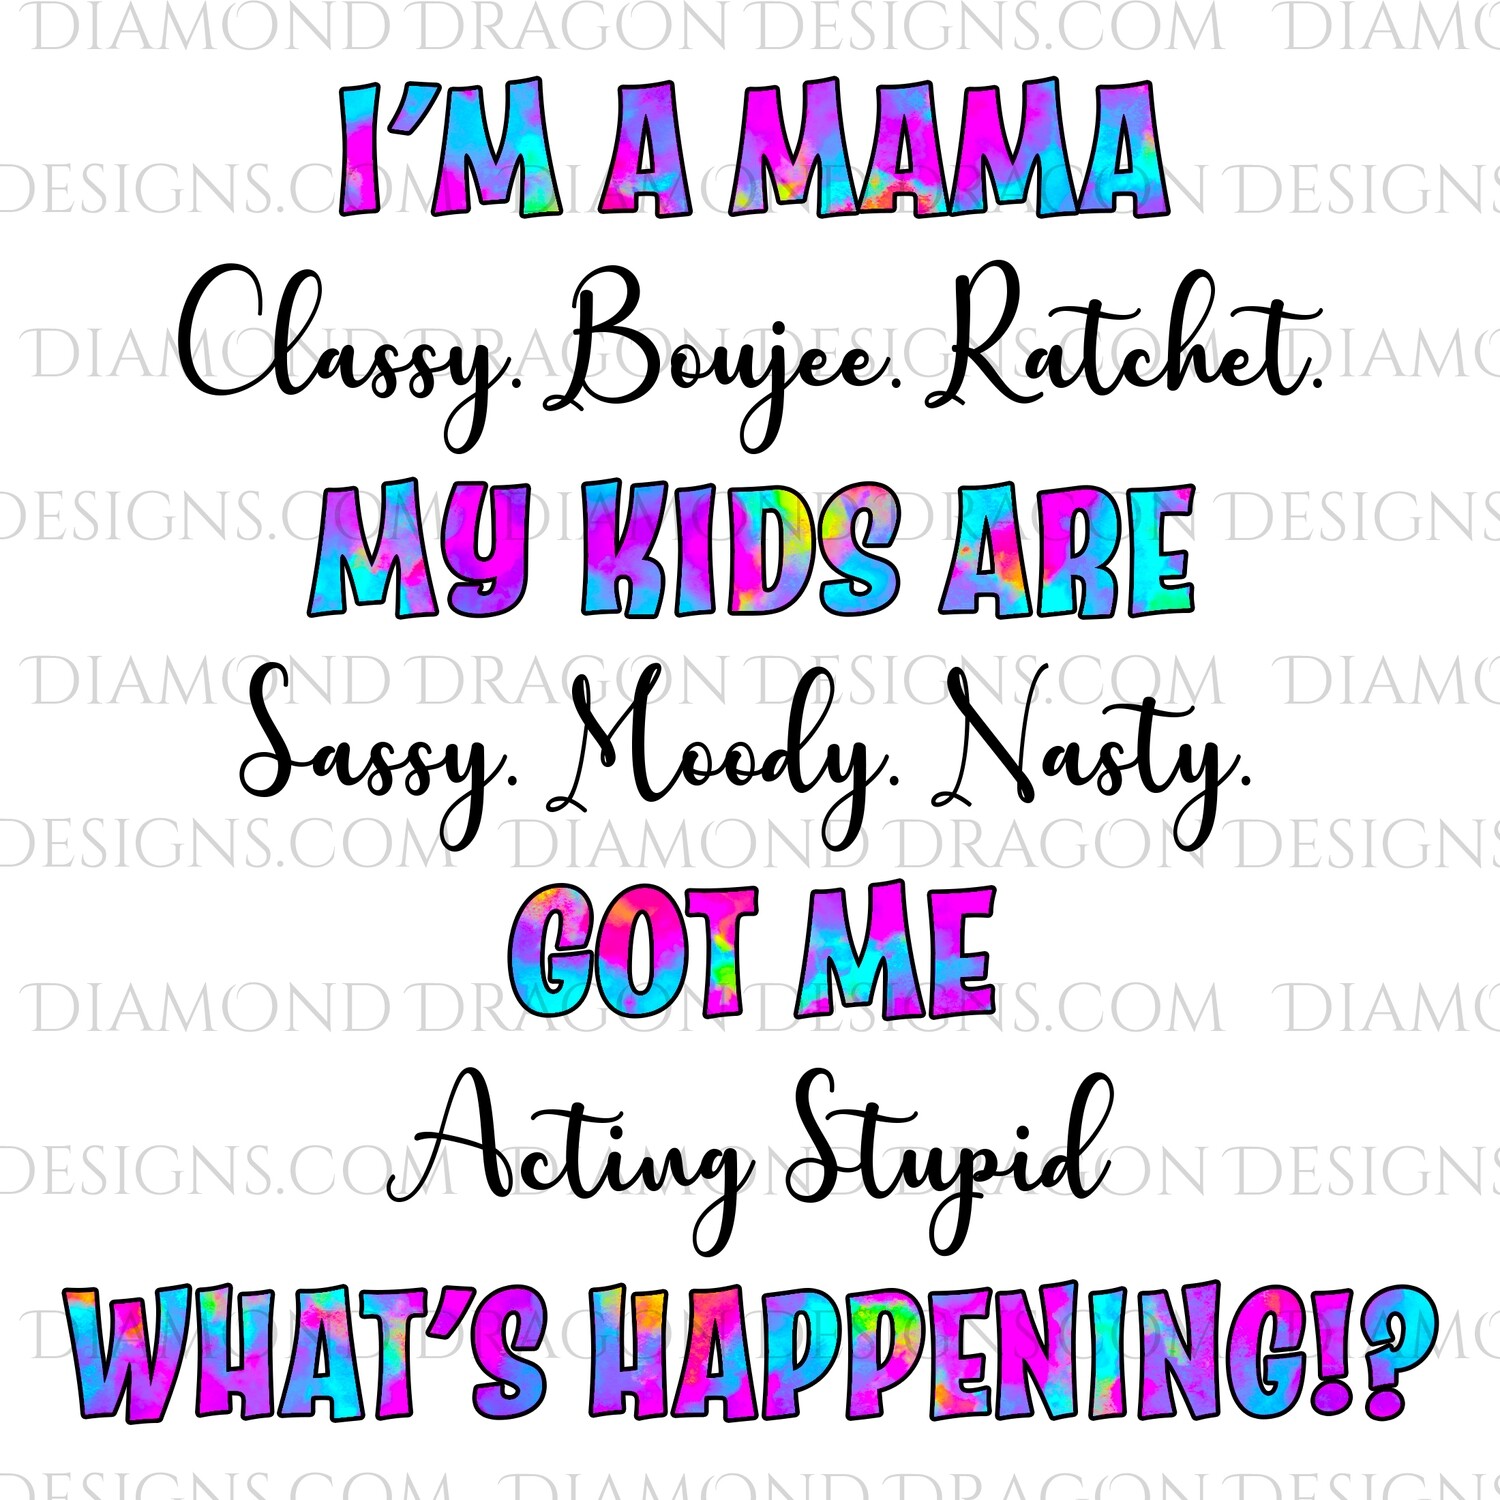 Quotes - I'm a Mama, Classy Boujee Ratchet, Digital Image